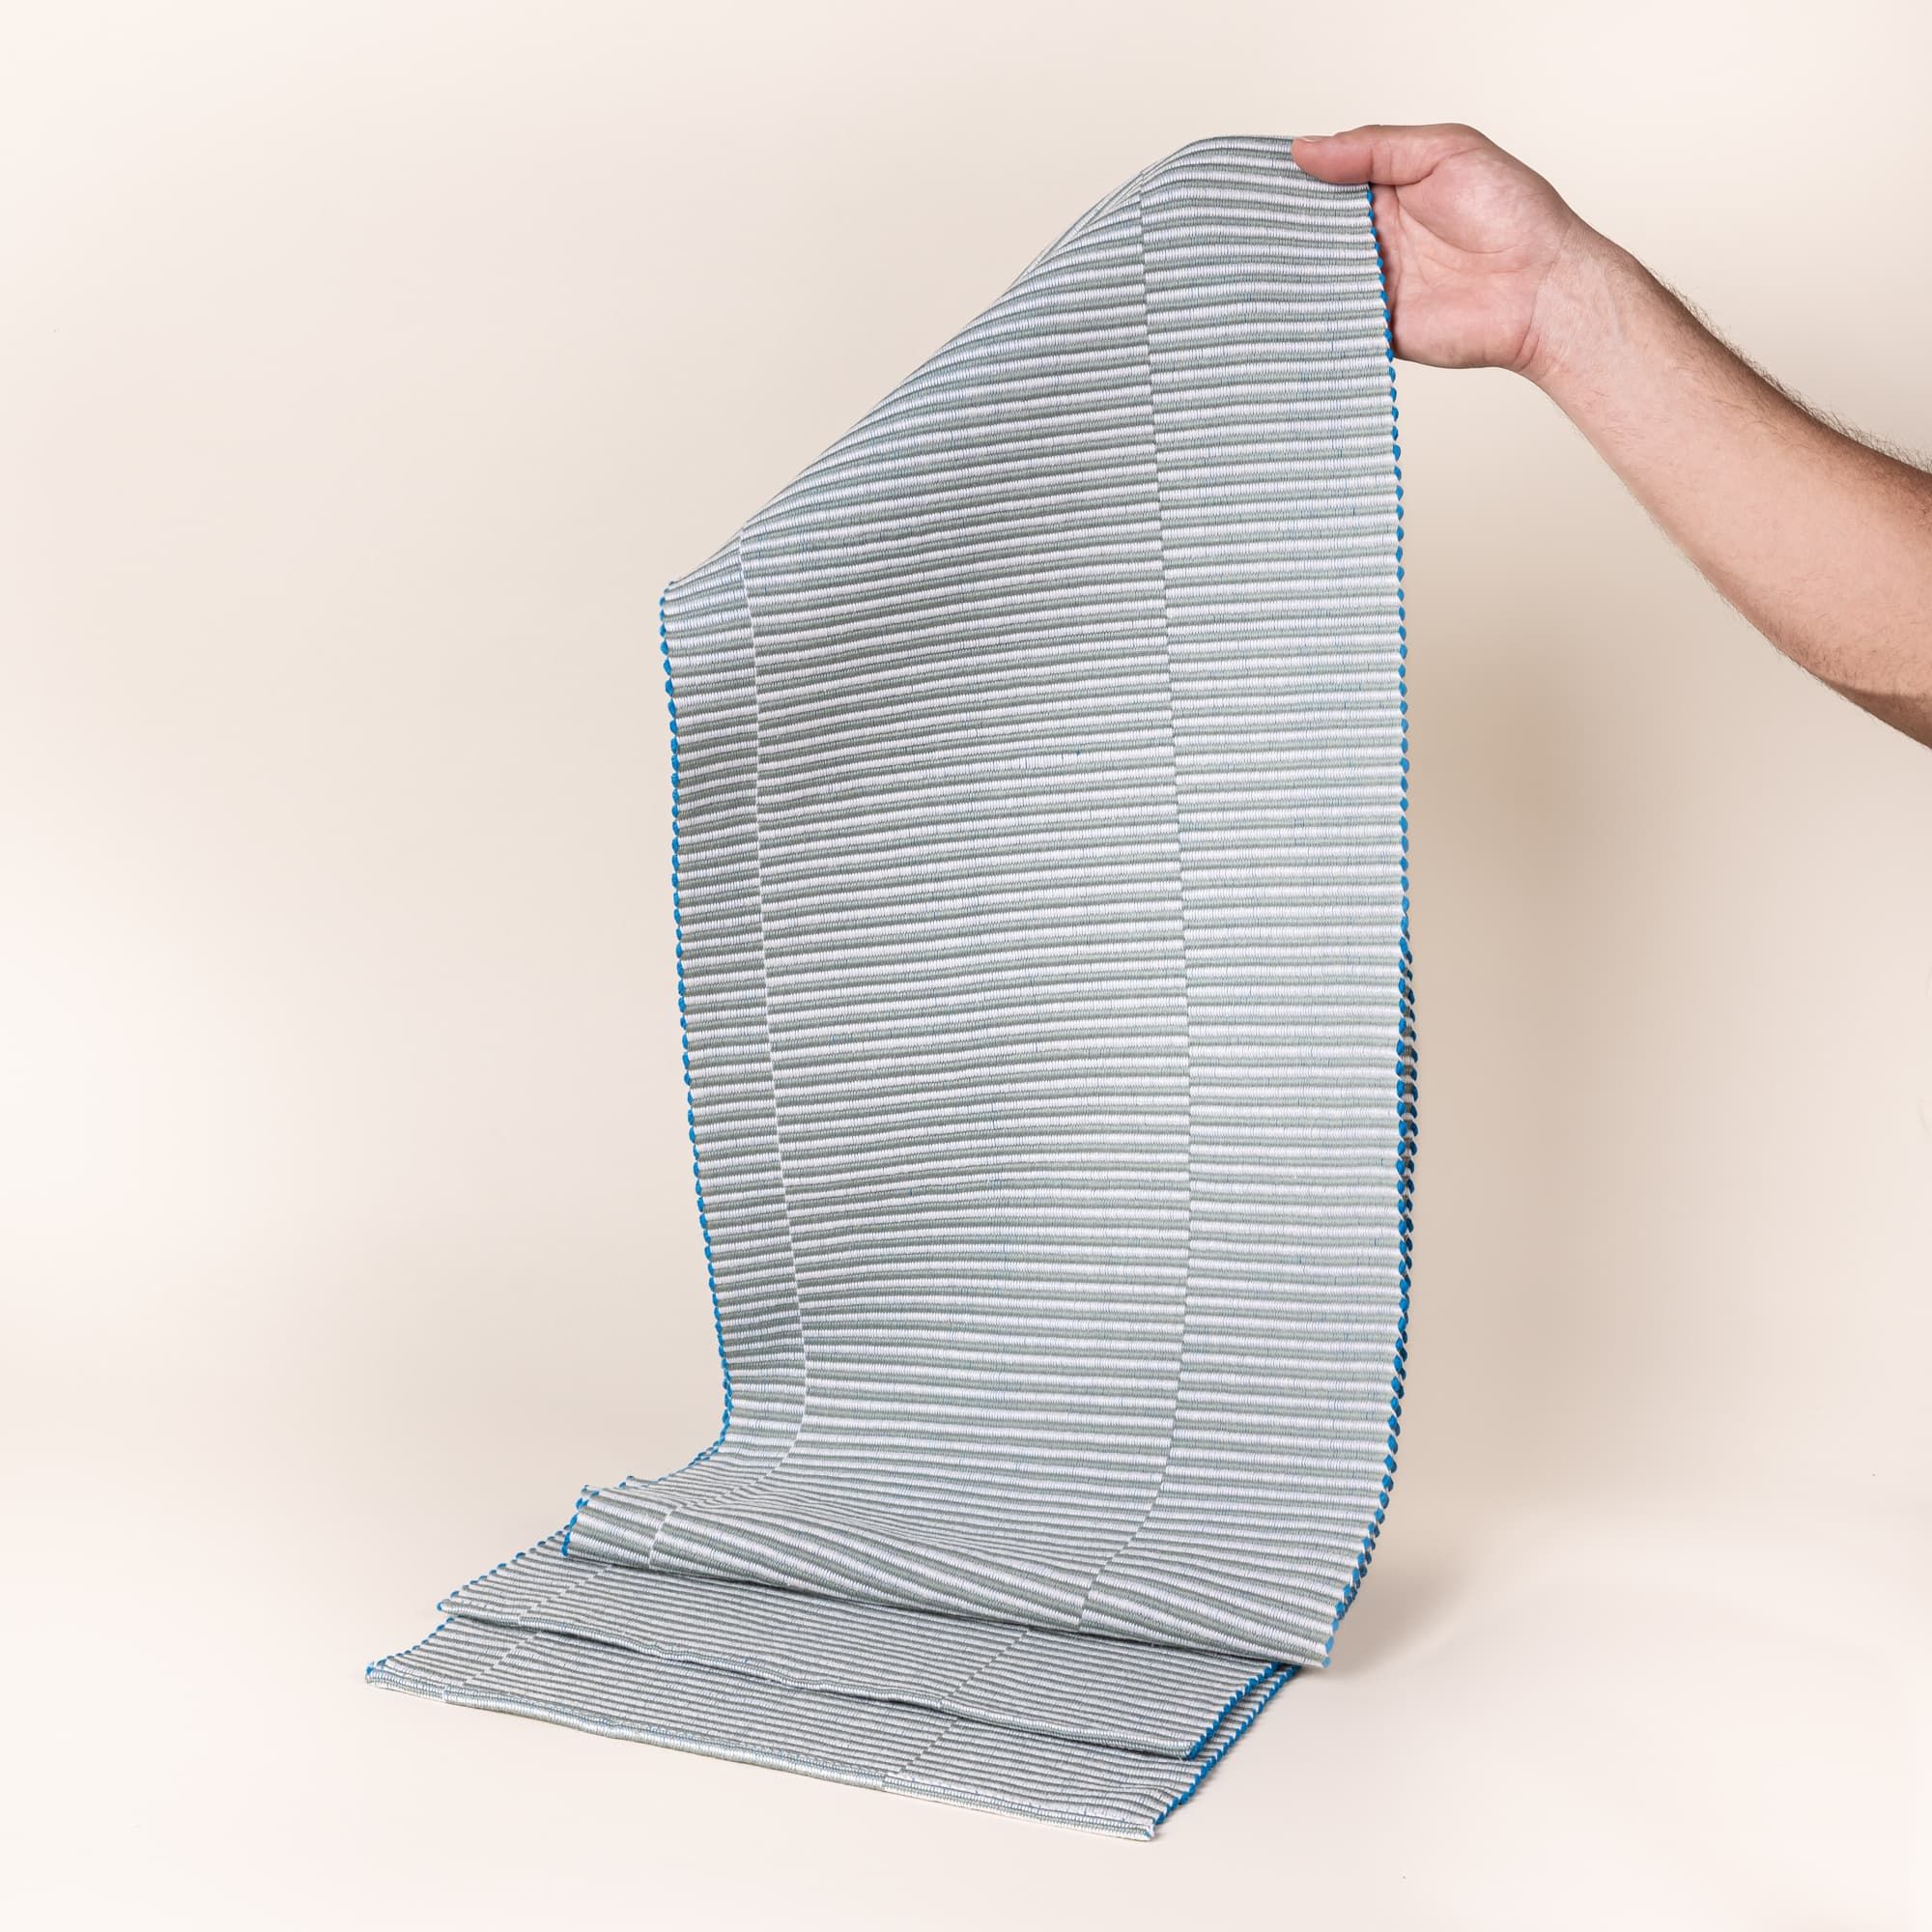 A hand holds up a table runner with offset stripe design that is hand woven in sage and blue colors. 